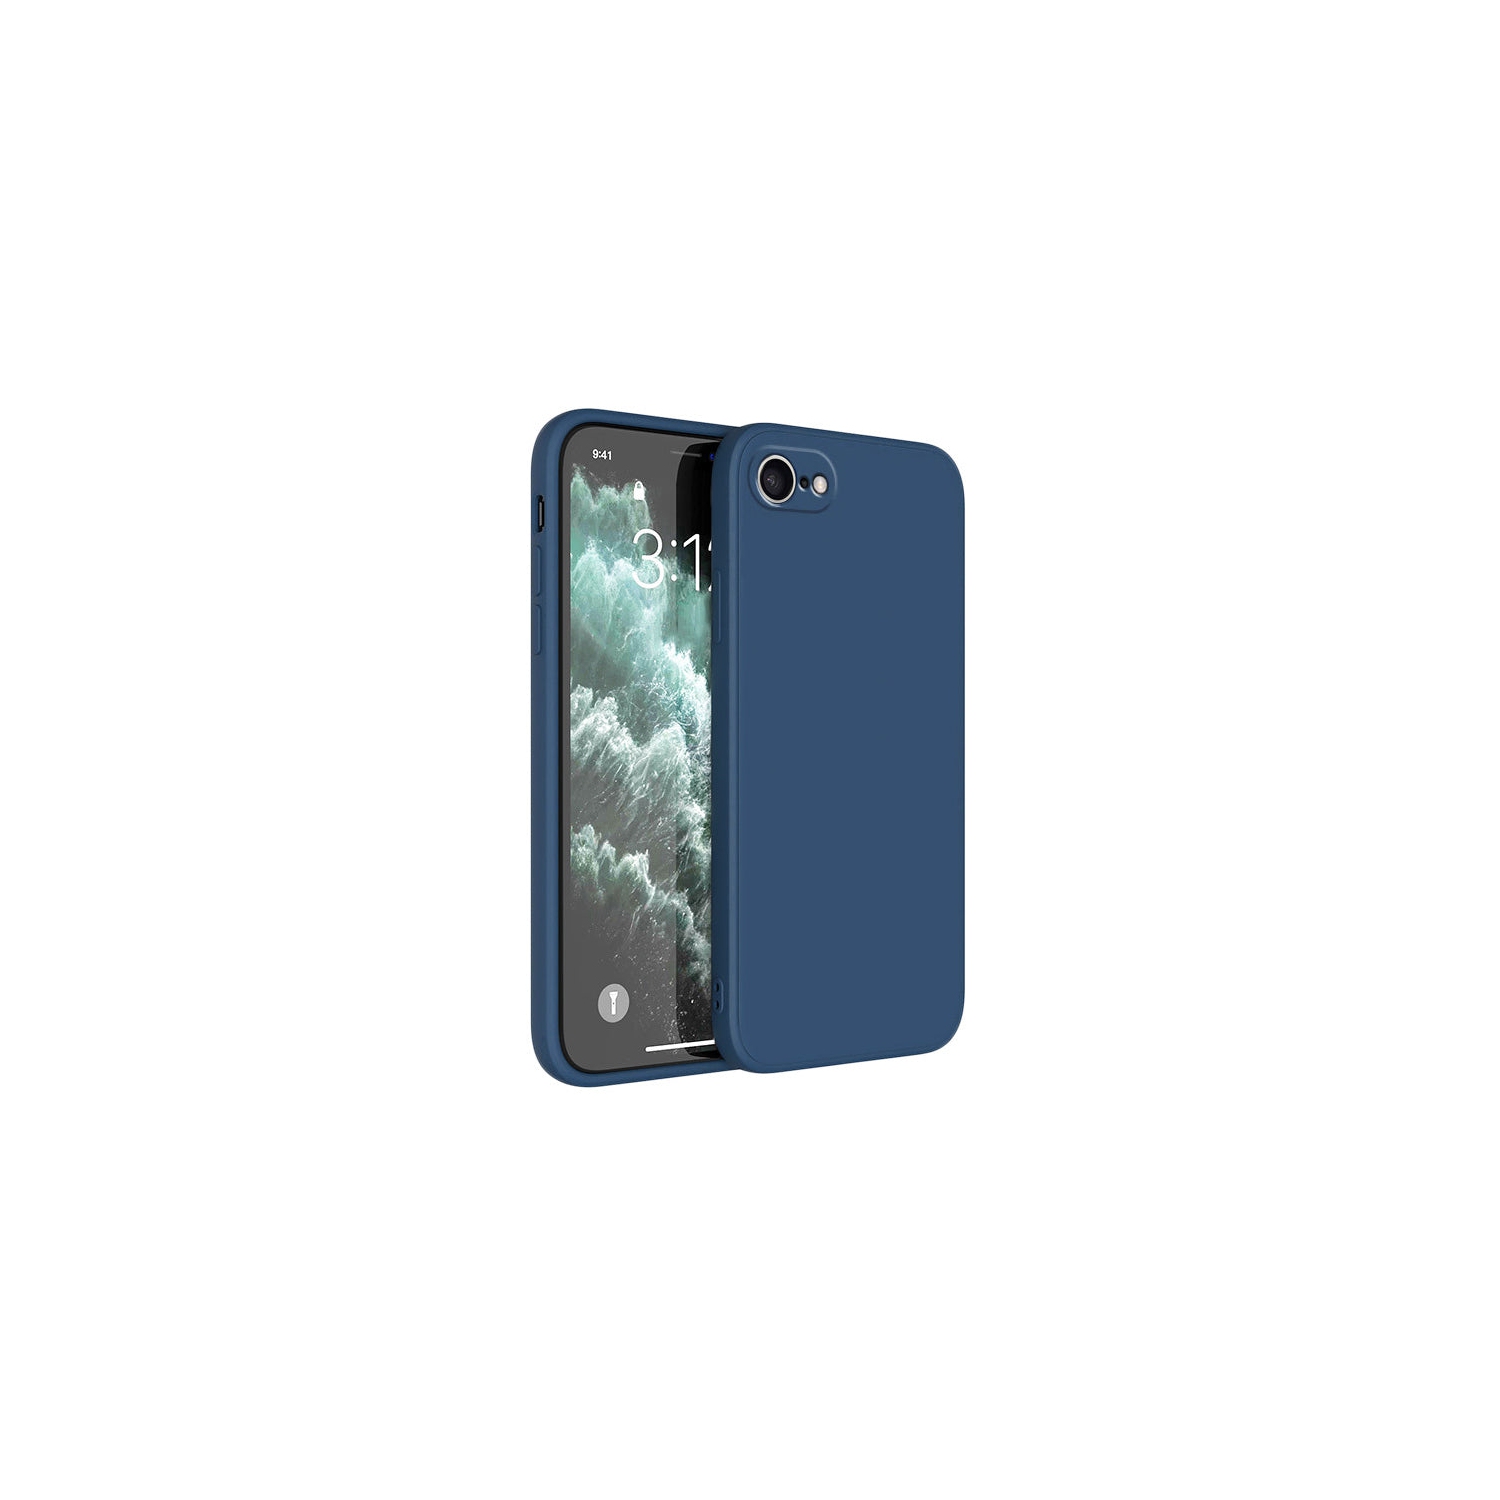 PANDACO Soft Shell Matte Navy Case for iPhone 6 or iPhone 6S